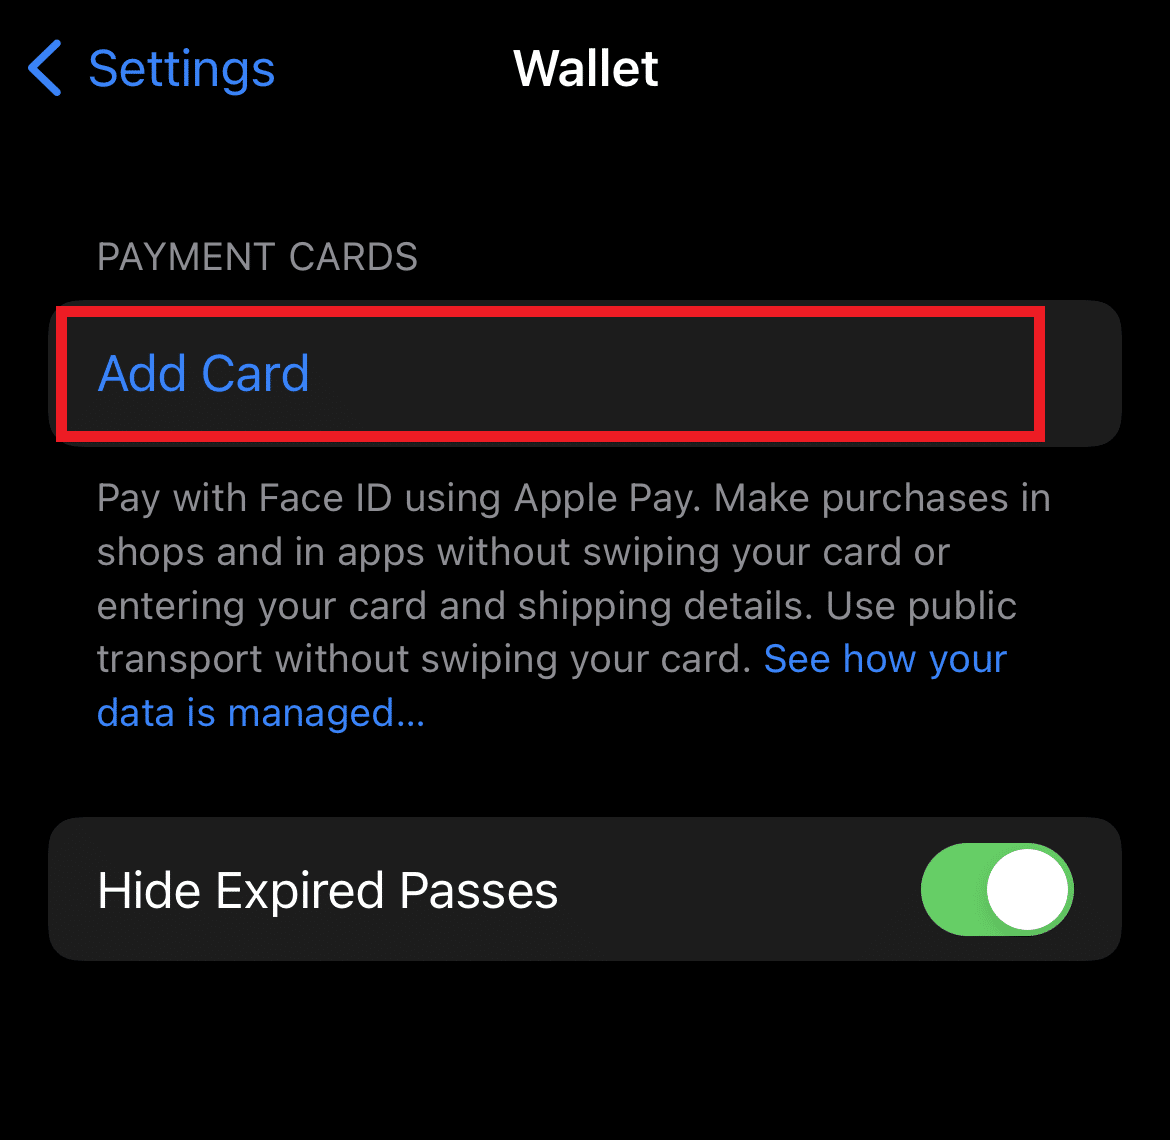 tap on Add Card to add a new card to Apple Pay